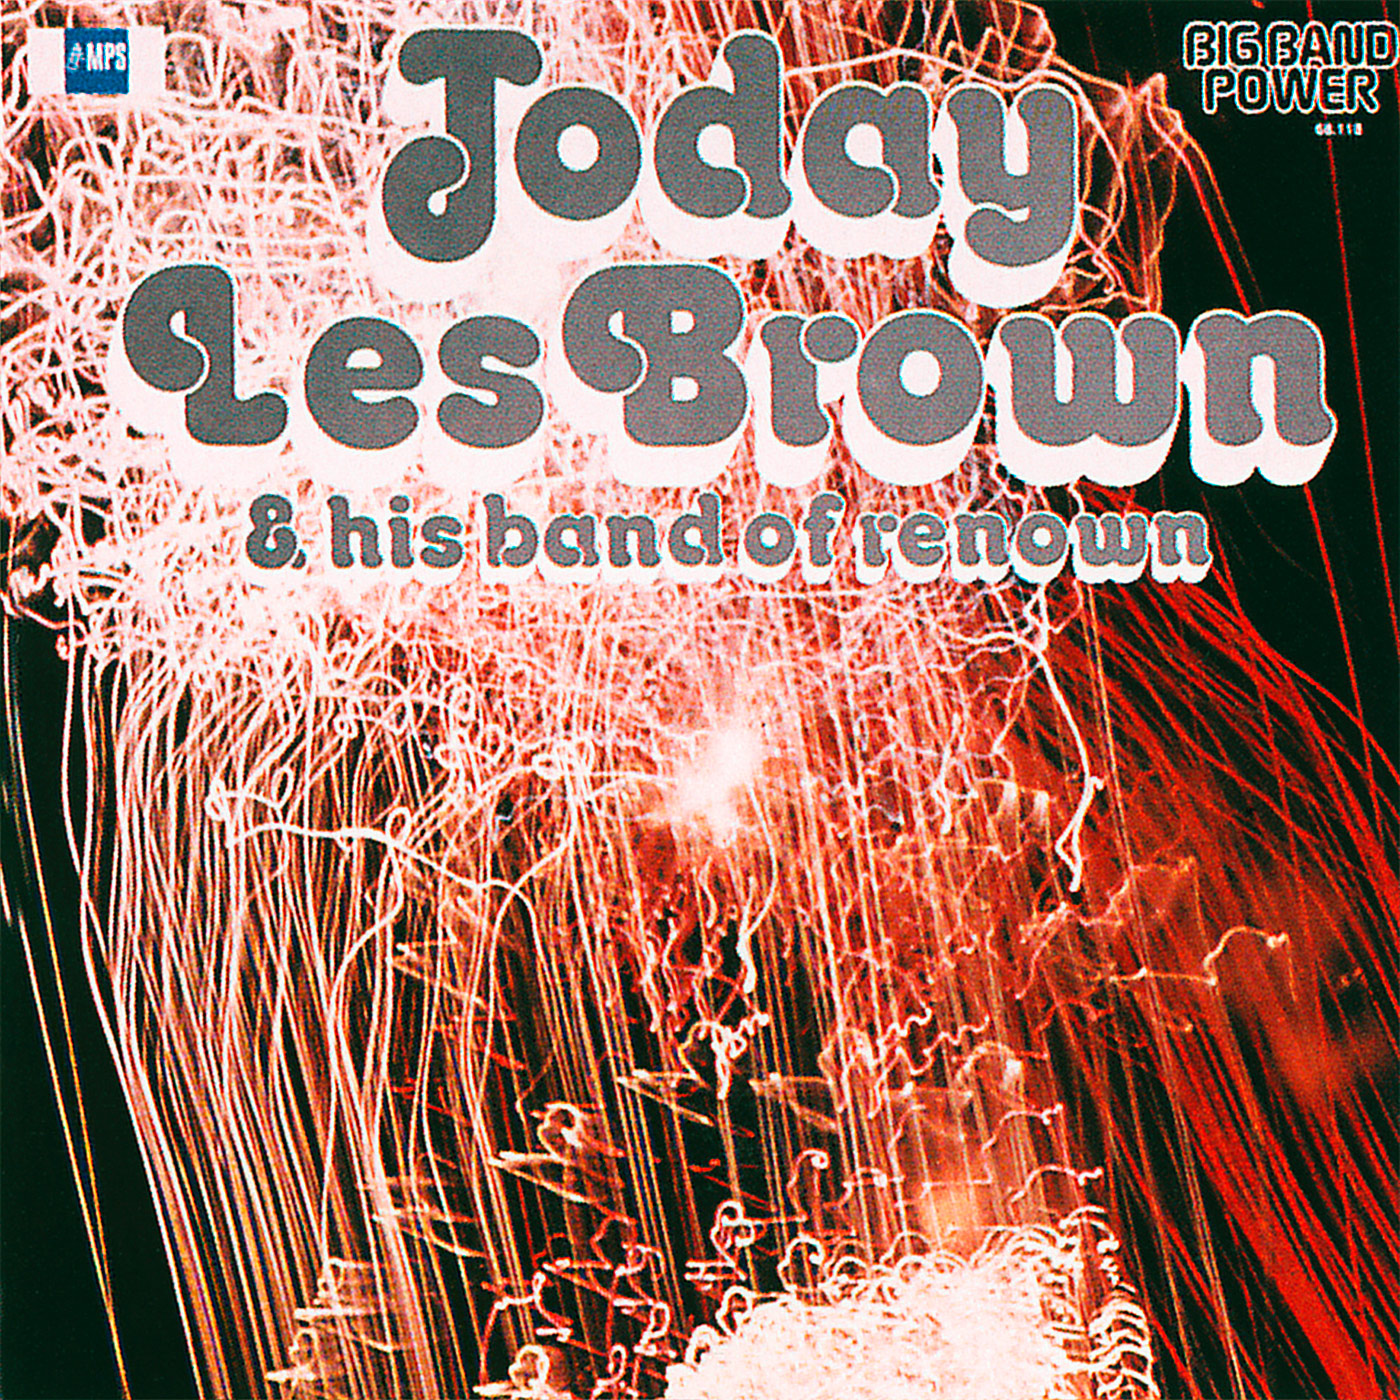 Les Brown & His Band Of Renown - Today (1976/2015) [e-Onkyo FLAC 24bit/88,2kHz]